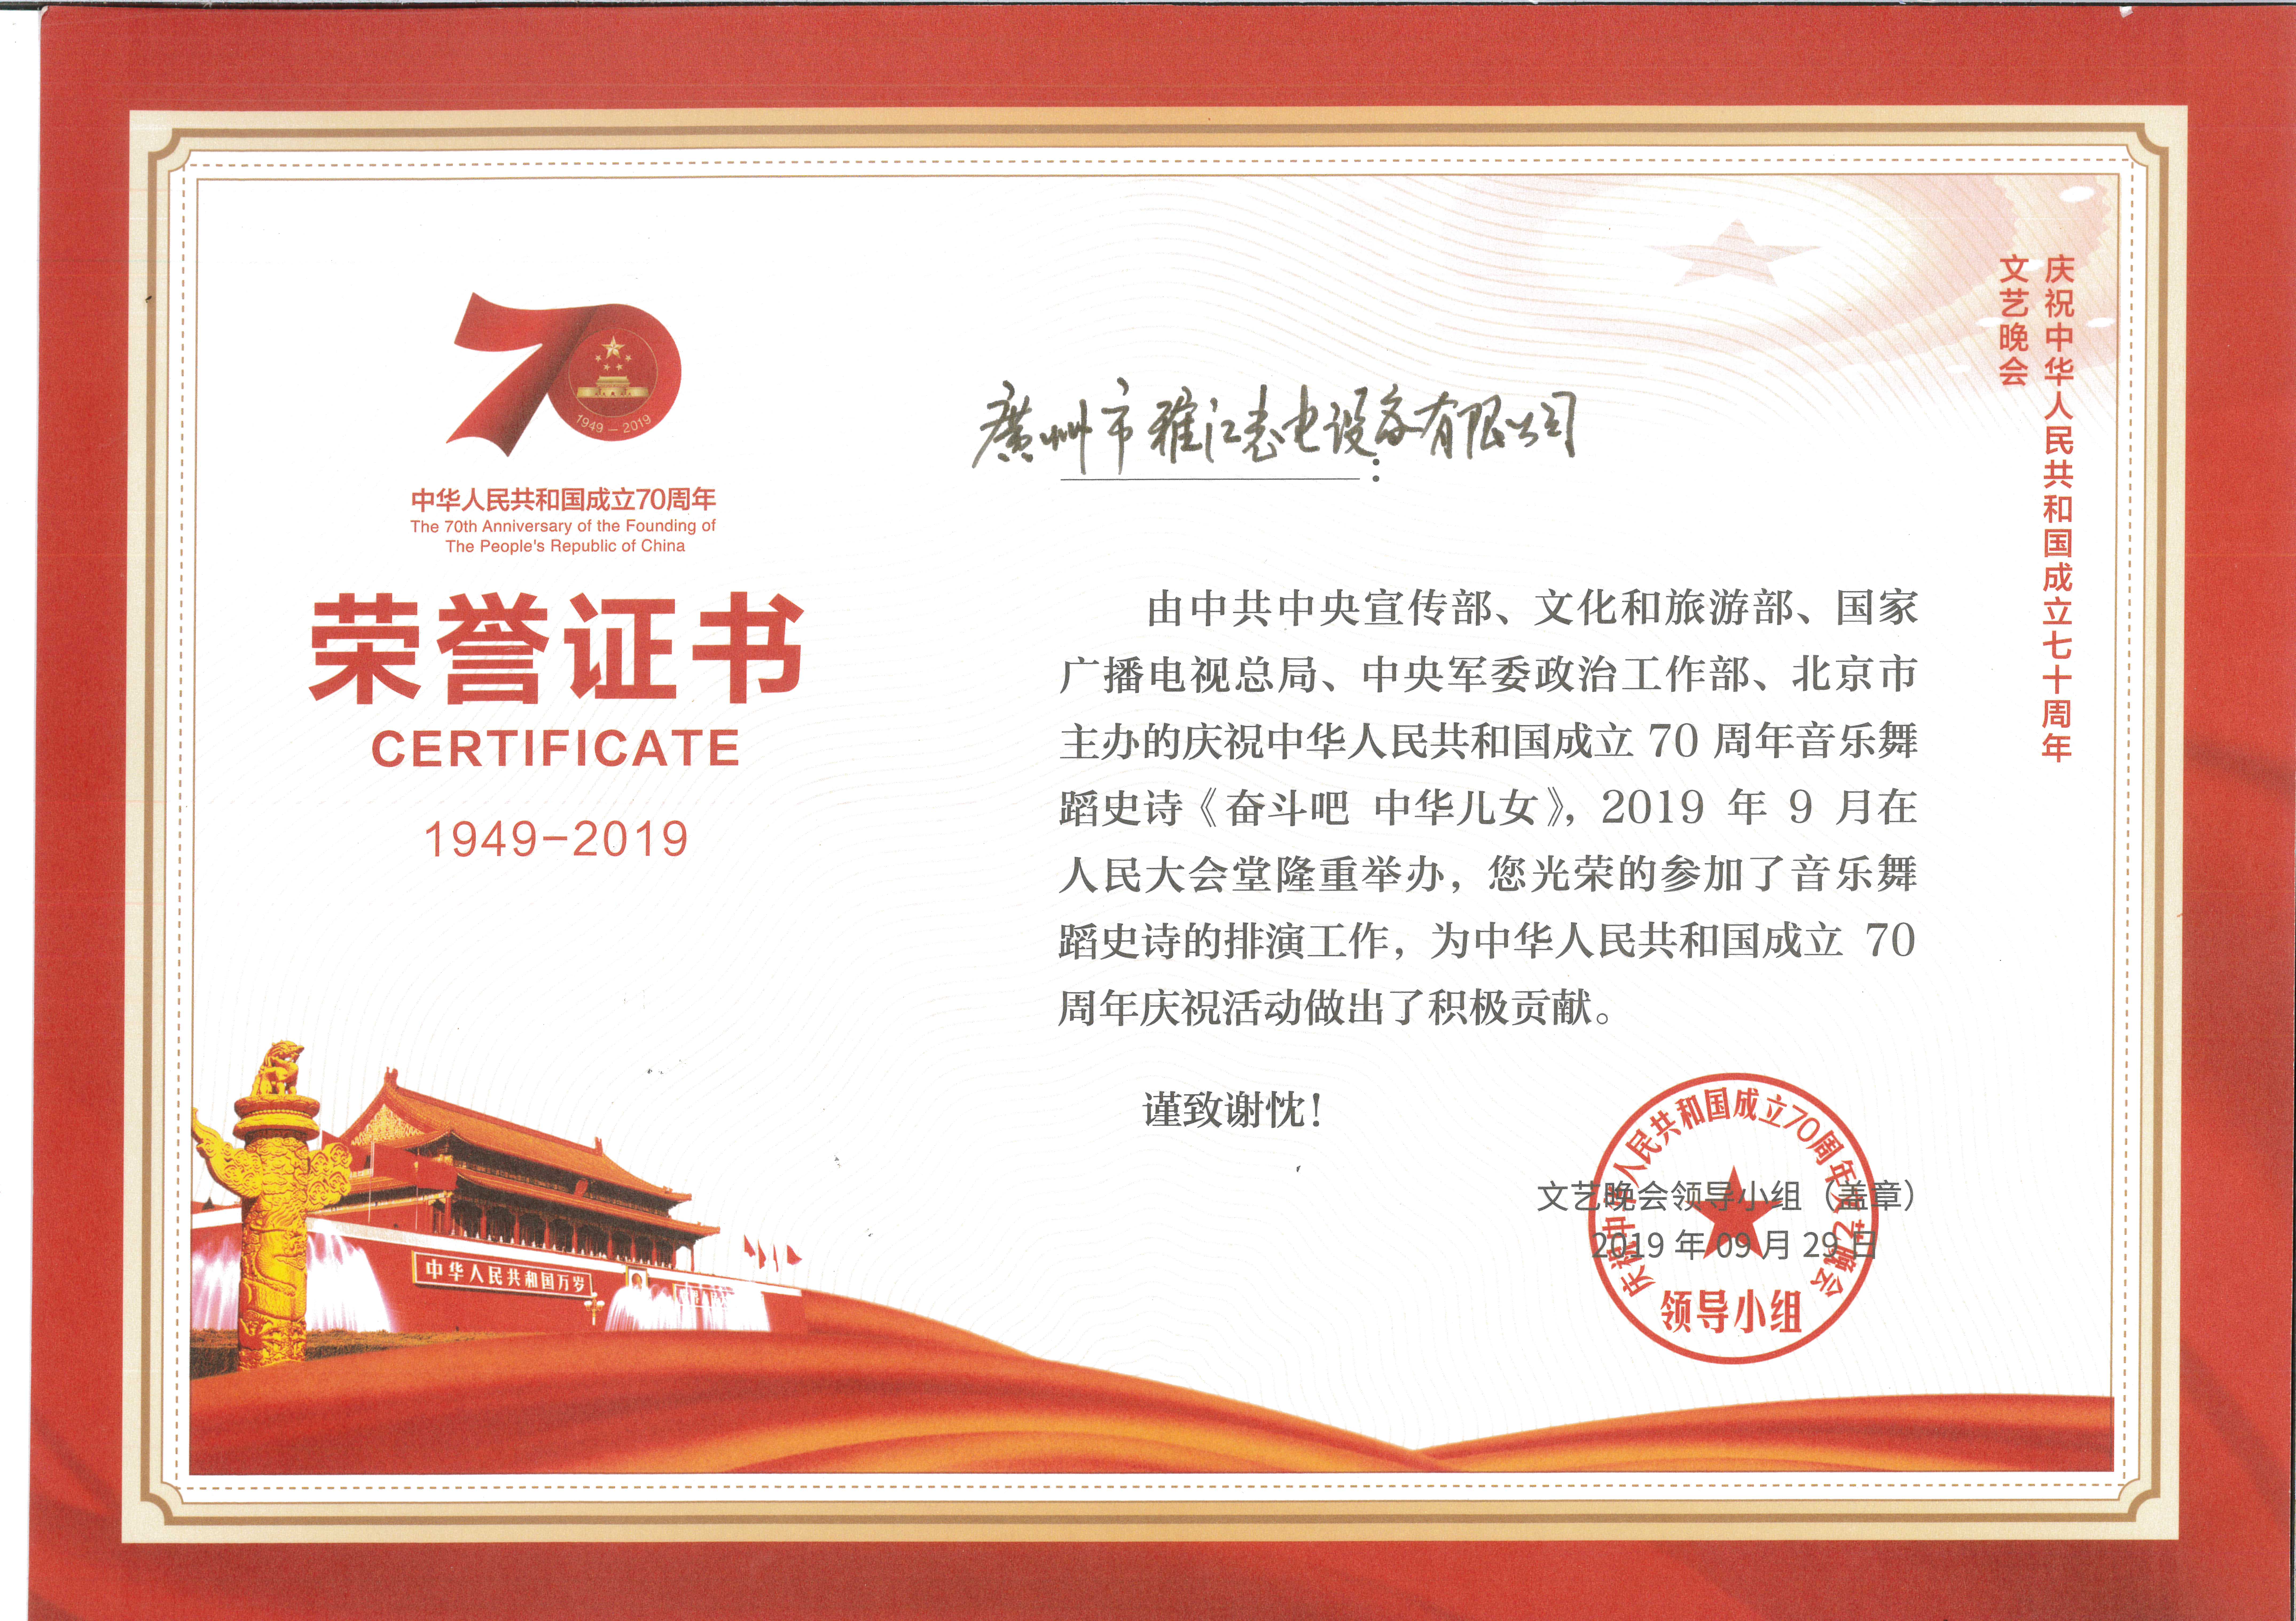 Honorary certificate of celebration of the 70th anniversary of the founding of the National Republic of China